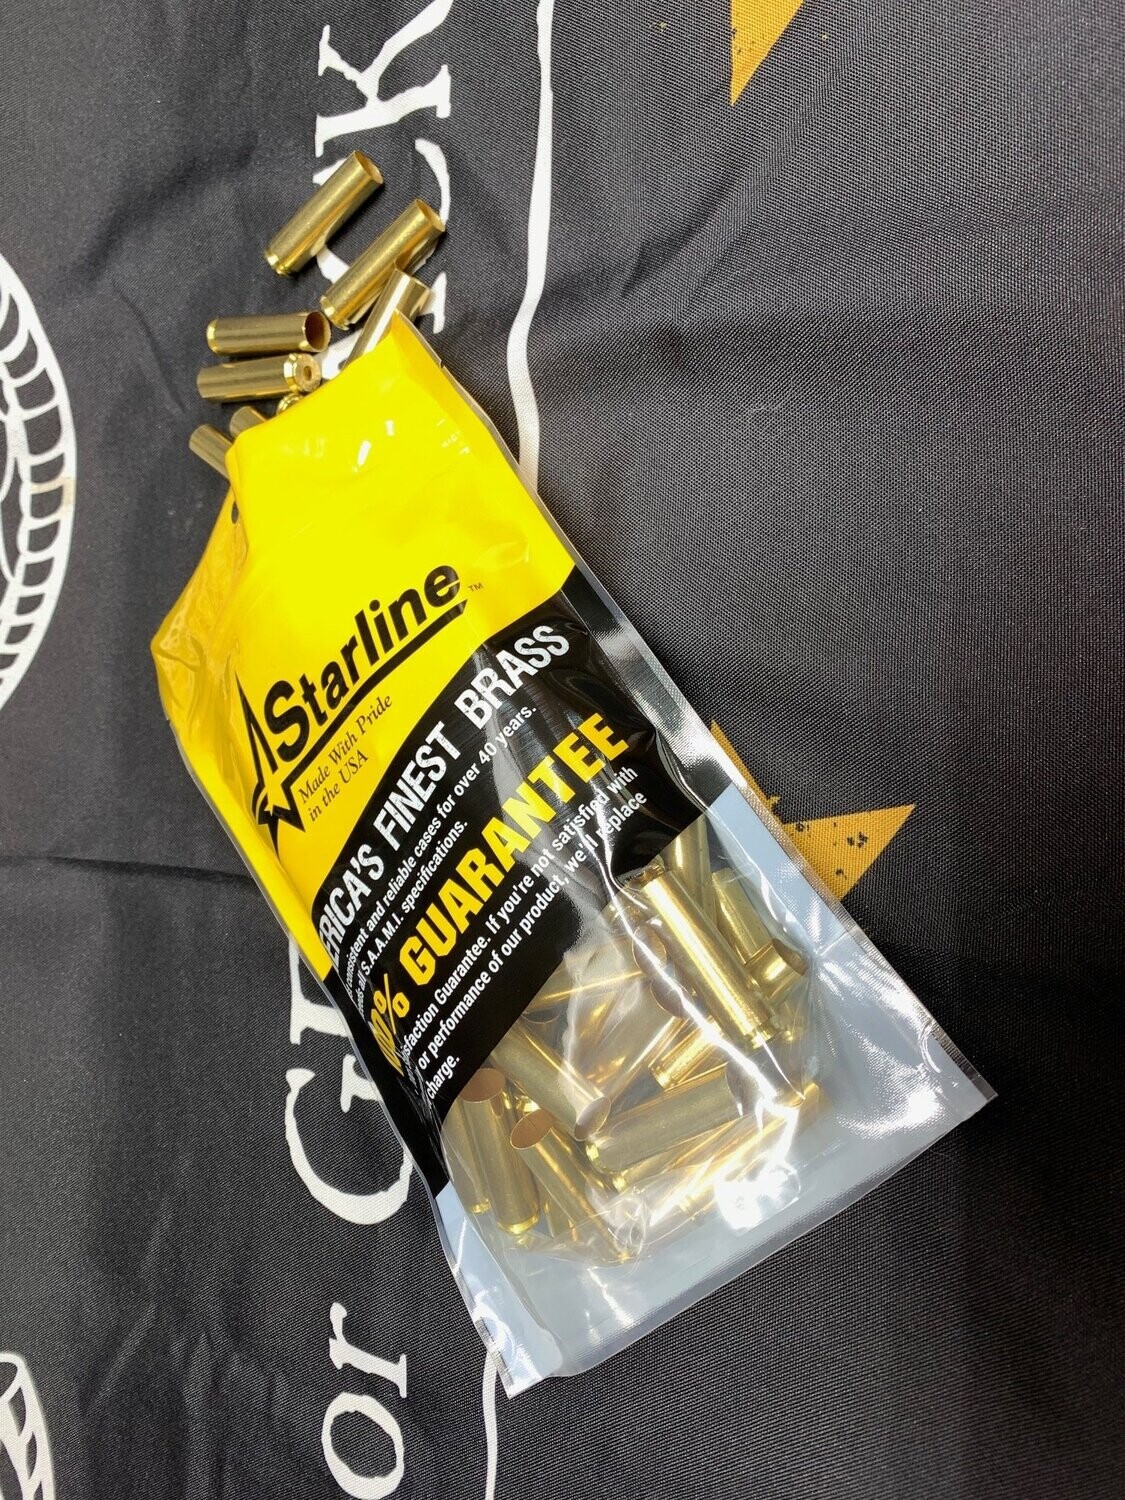 12.7x42mm New Starline Brass (Limit 500 Cases per Household)